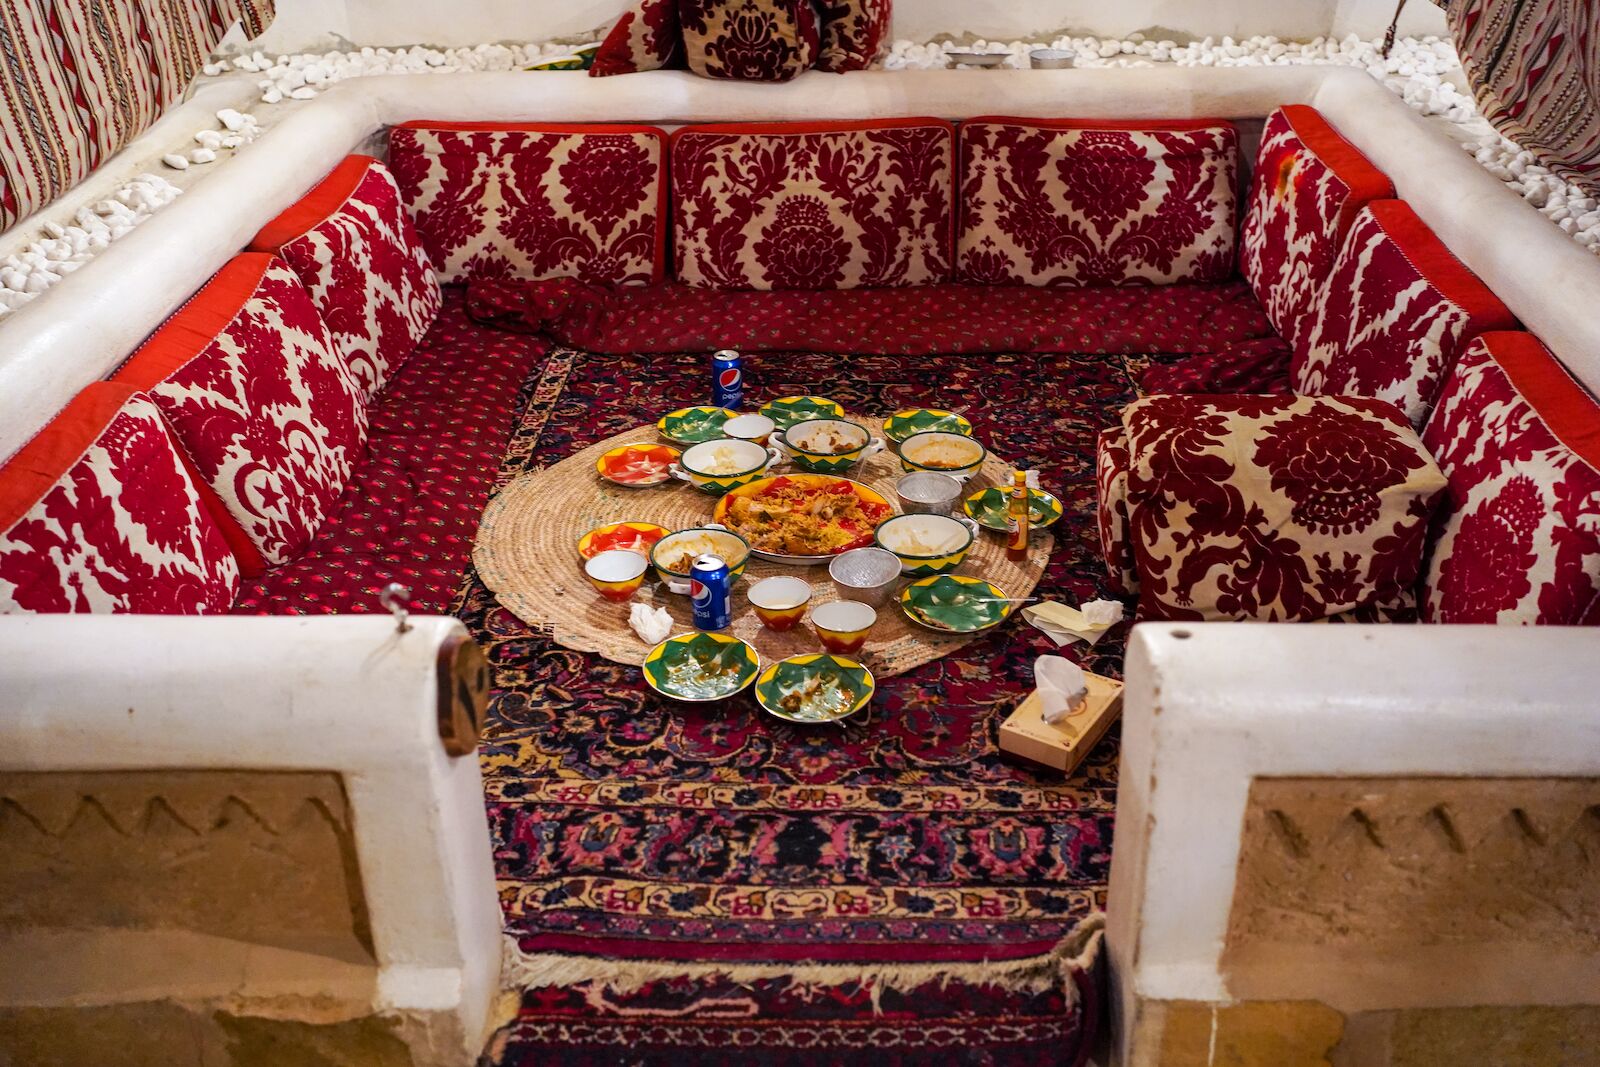 Riyadh / Saudi Arabia - January 8, 2020: Traditional Yemeni restaurant in the capital of Saudi Arabia, with compartments where families sit on the carpets and eat with their hands